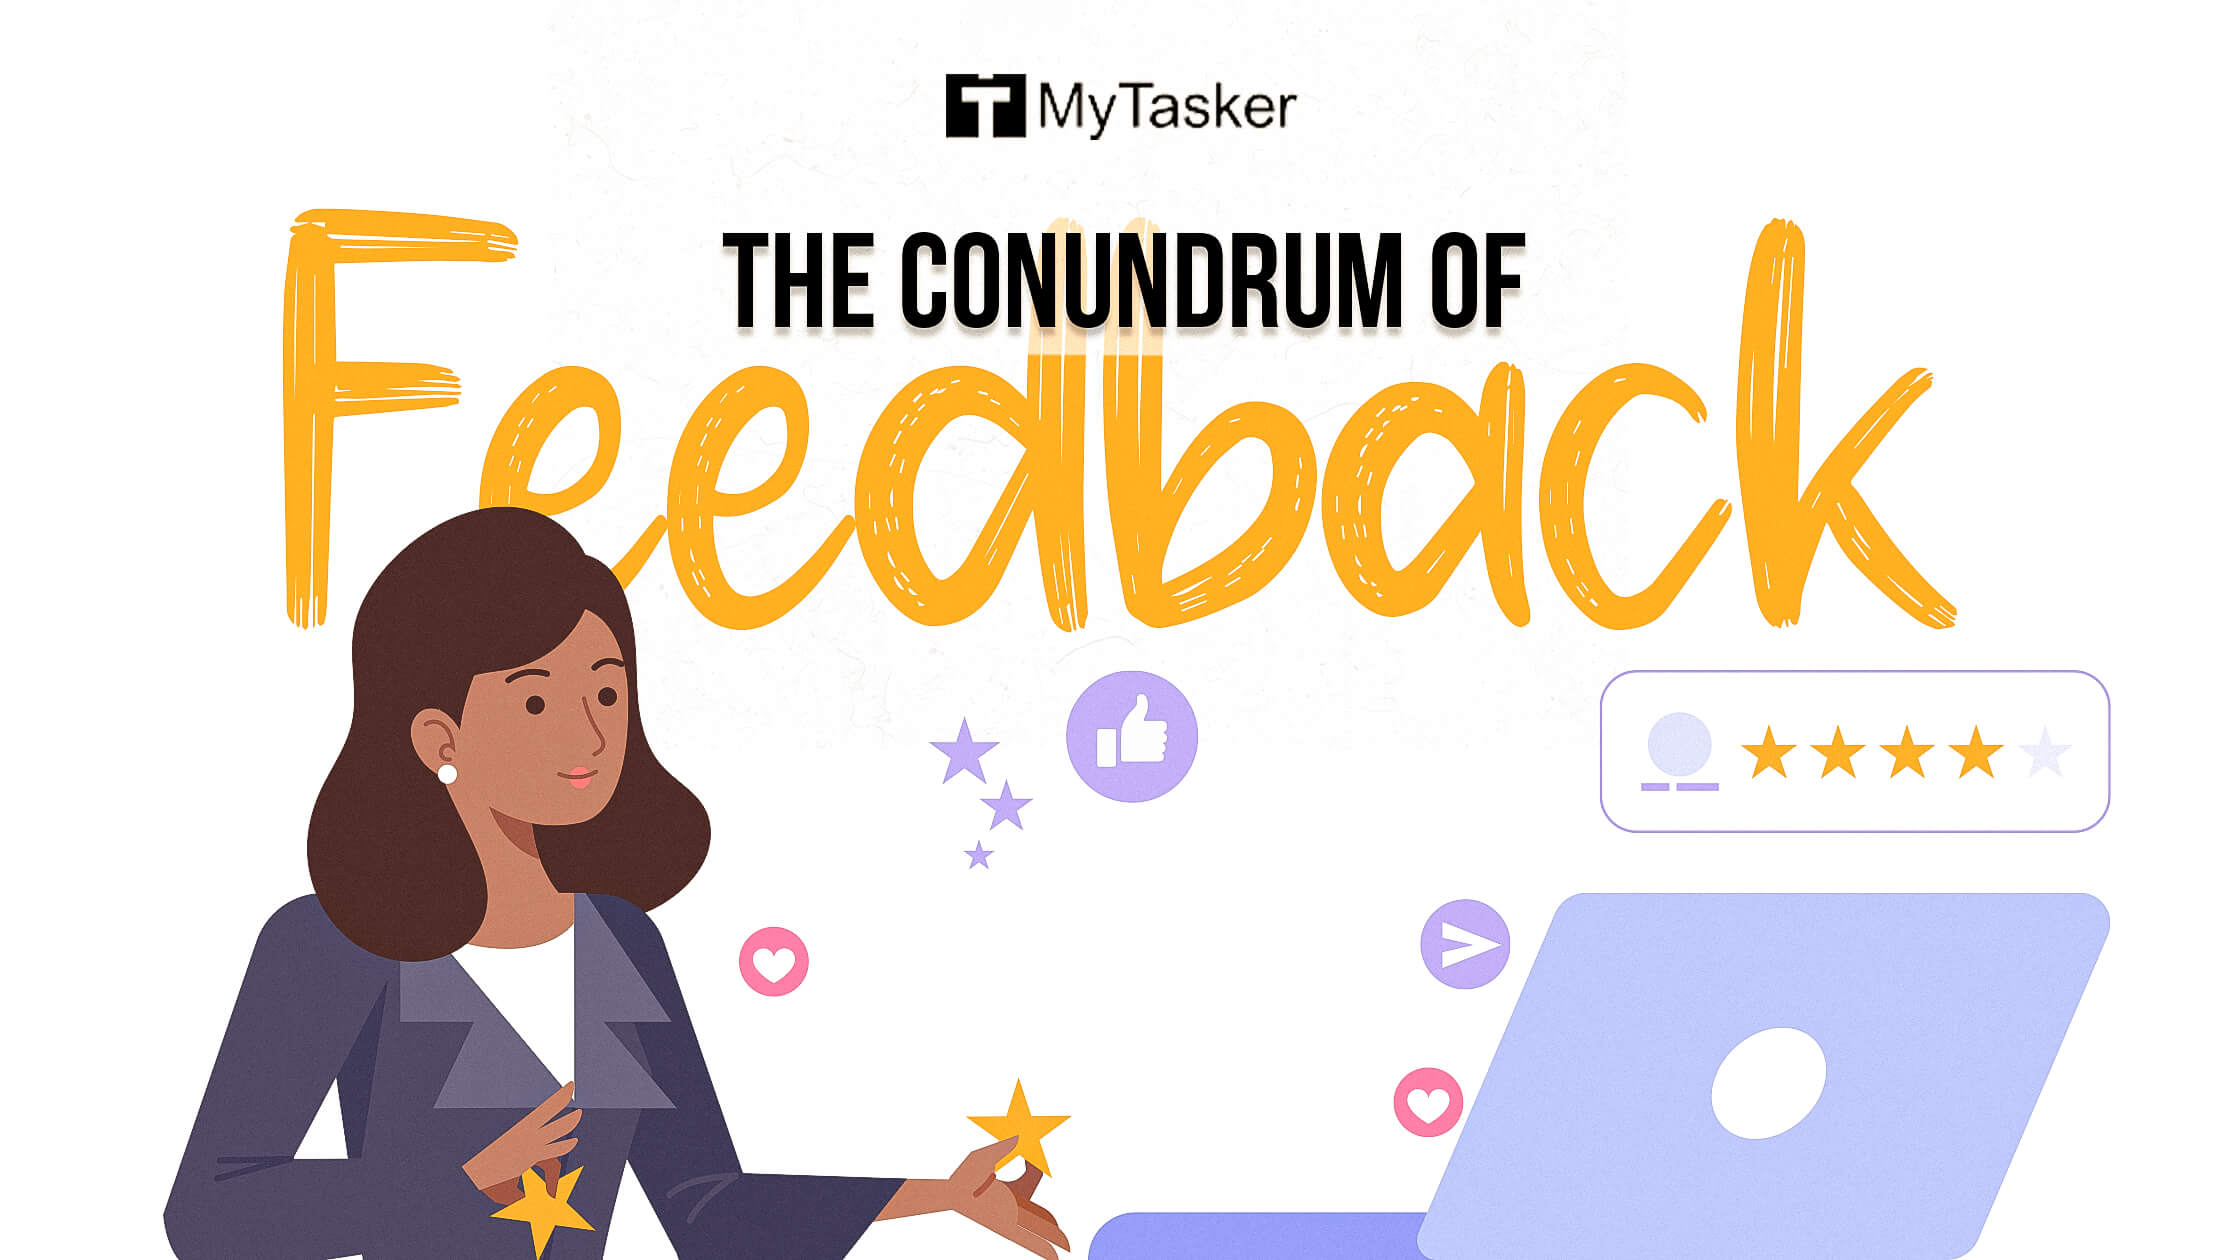 The Conundrum of Feedback